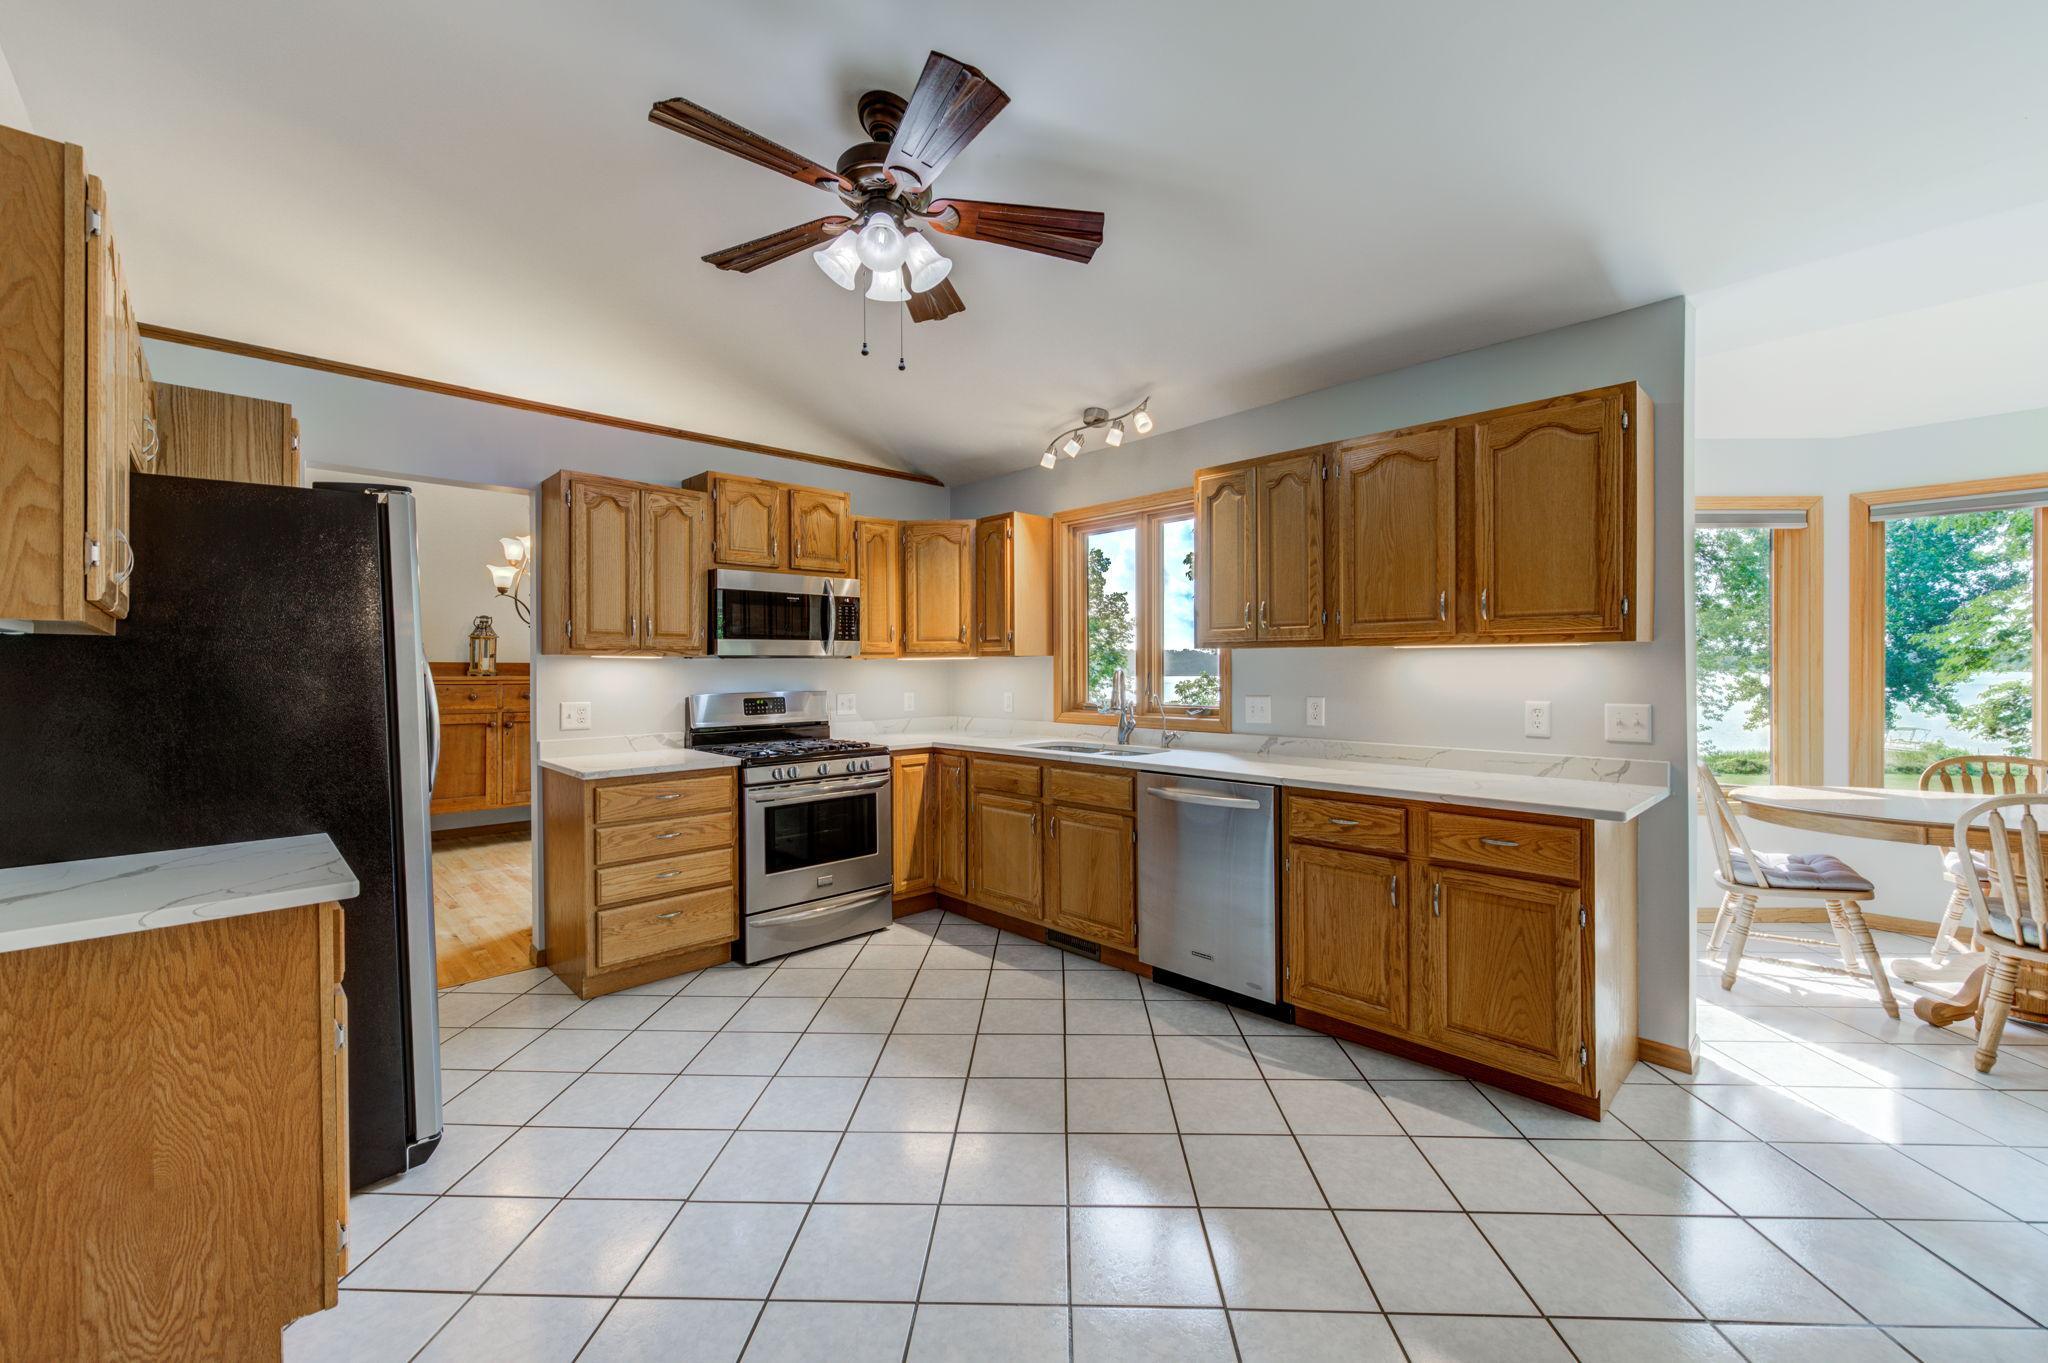 With stainless steel appliances and the window overlooking the lake, you will enjoy preparing meals and entertaining in this kitchen!